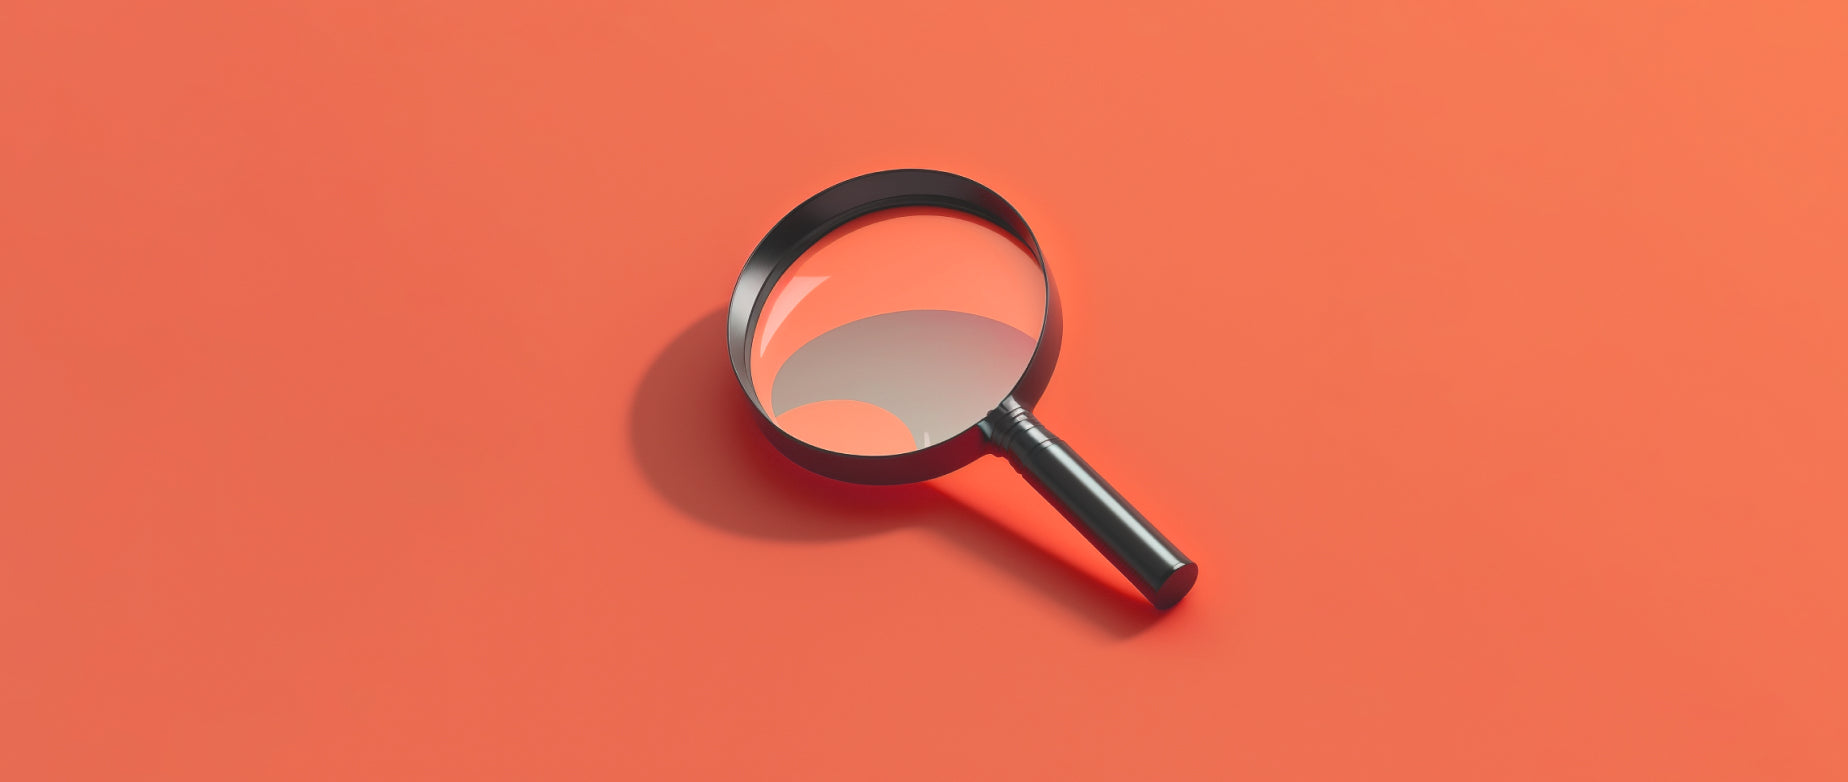 a magnifying glass against an orange background: video seo